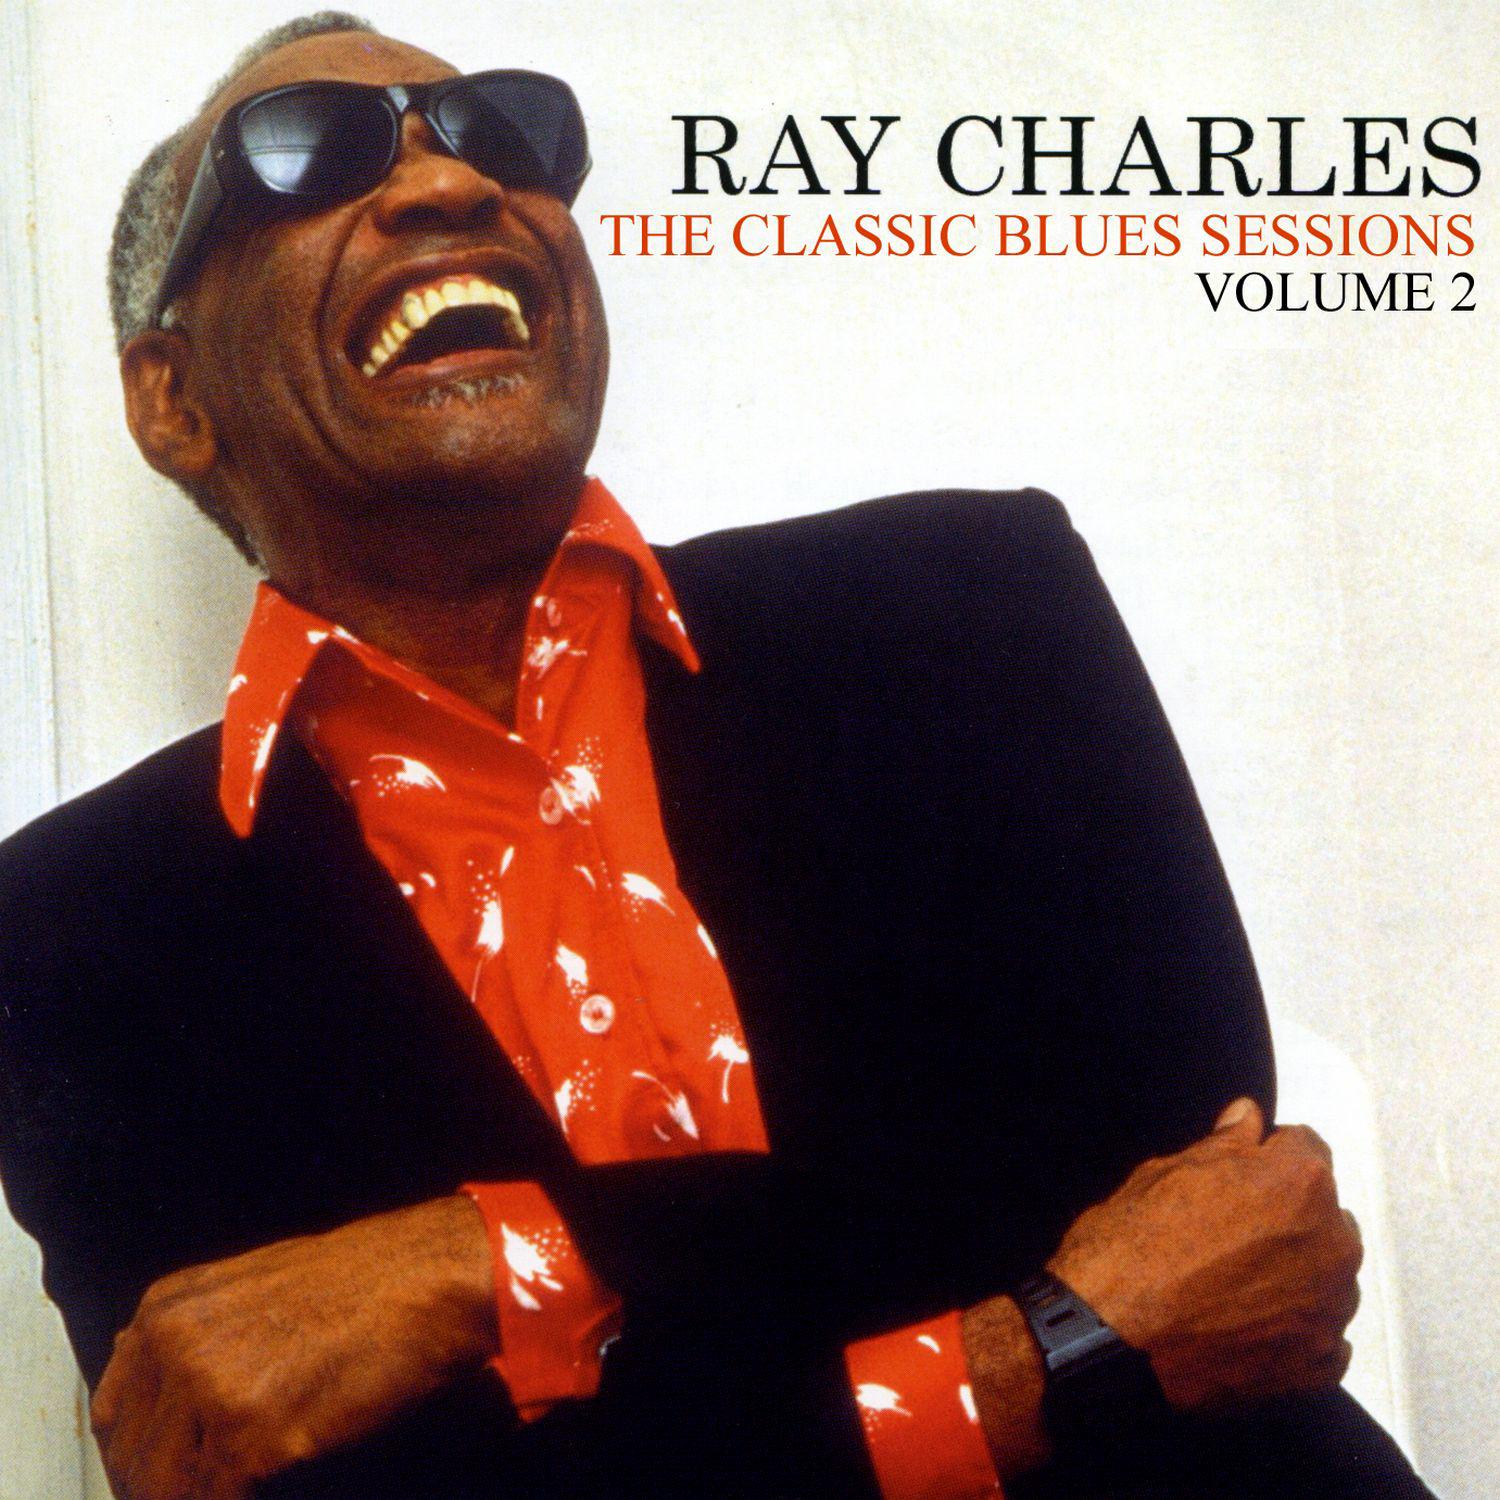 The Classic Blues Sessions Volume 2